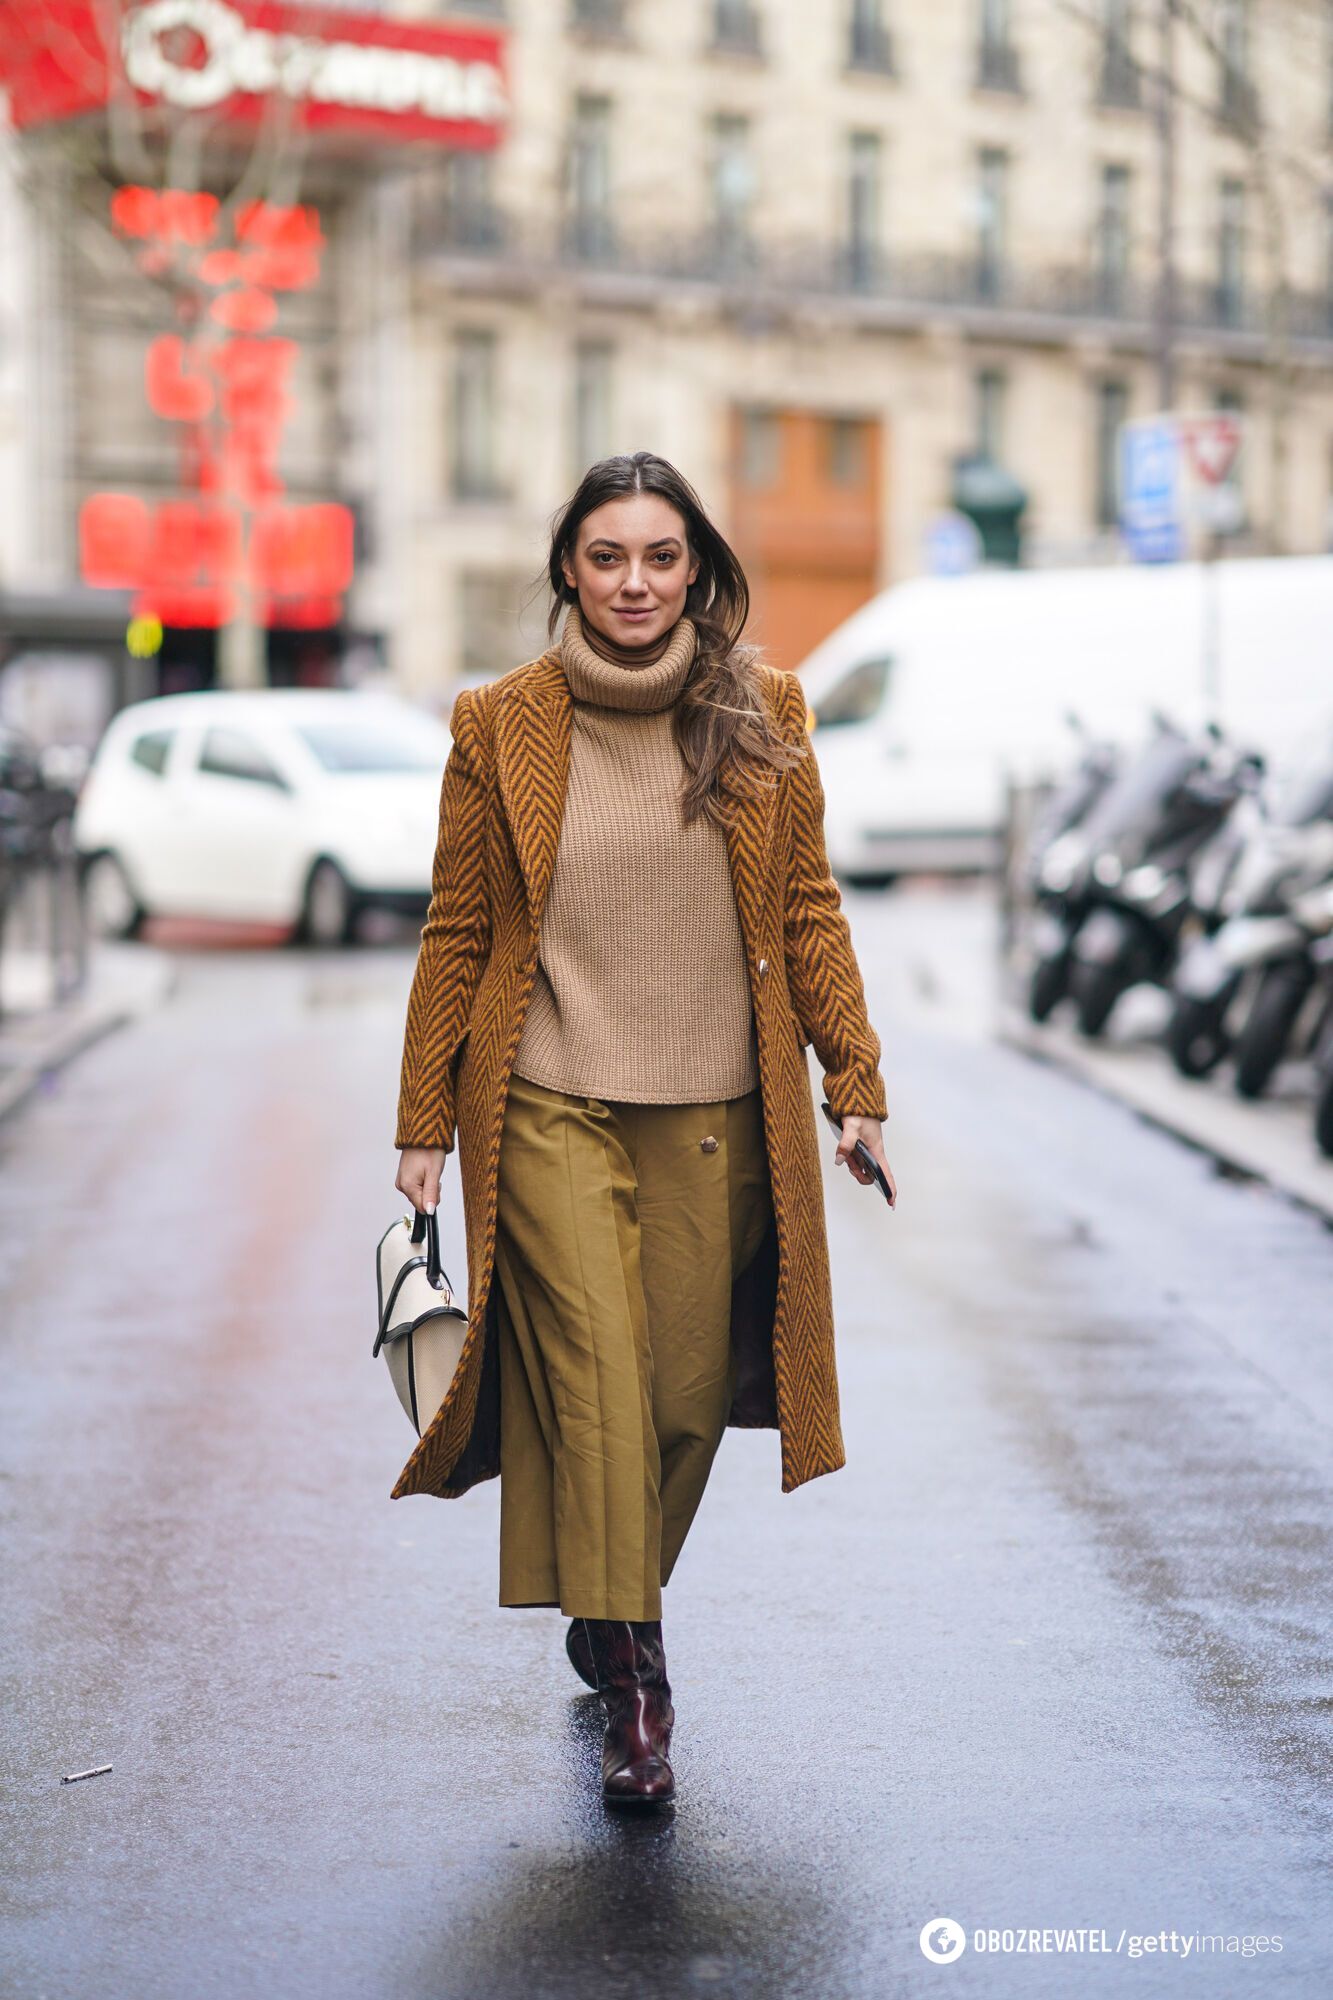 You won't be cold: 5 stylish ideas on how to wear winter shoes with skirts and dresses